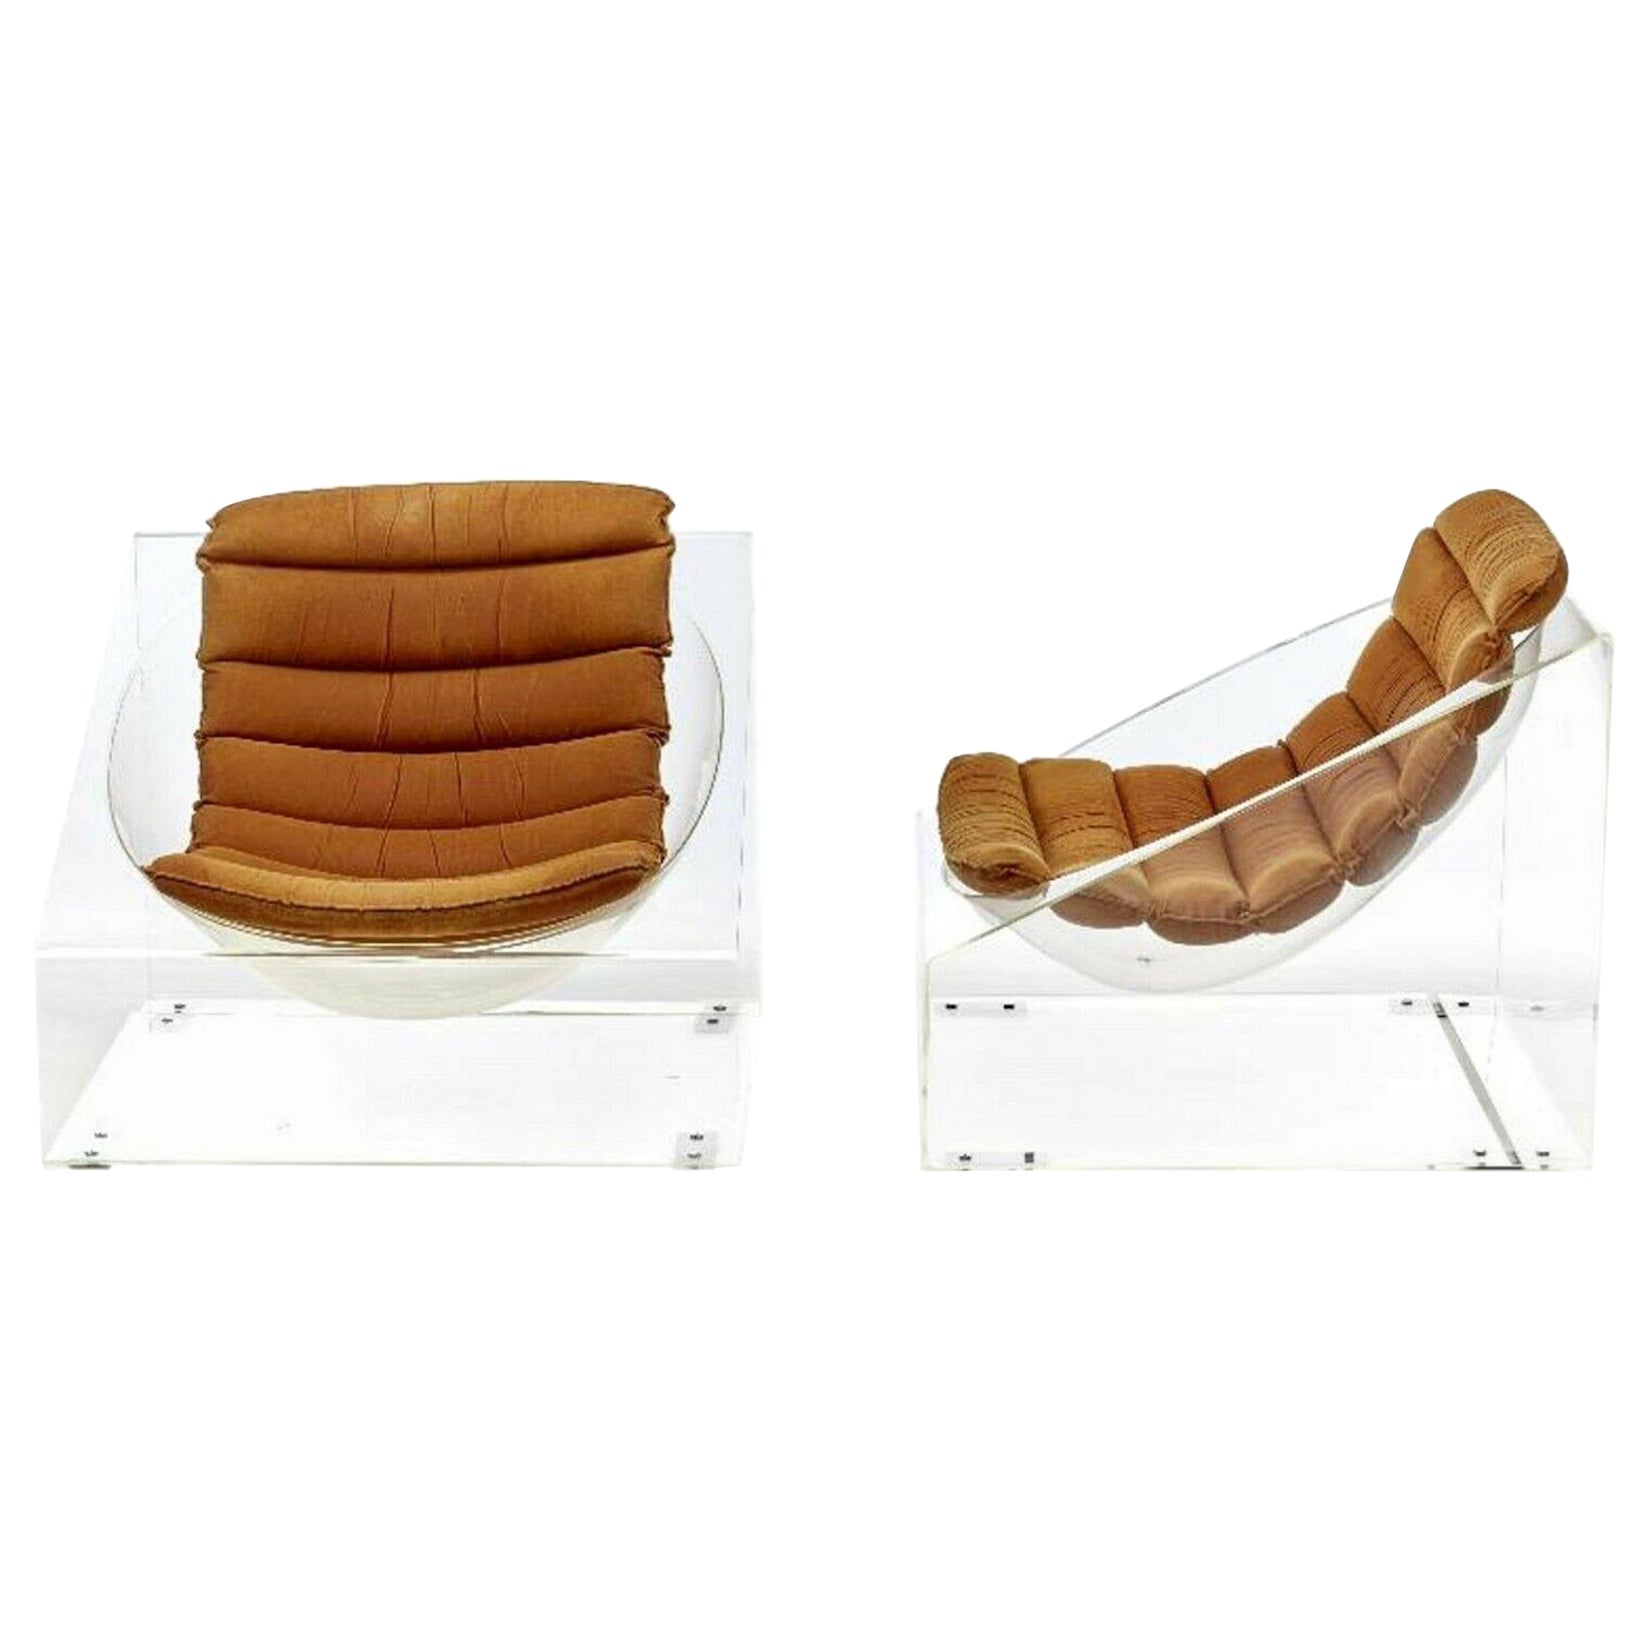 Pair of Plexiglass Armchairs "Toy Chair" Design Rossi Molinari for TOTEM, 1968